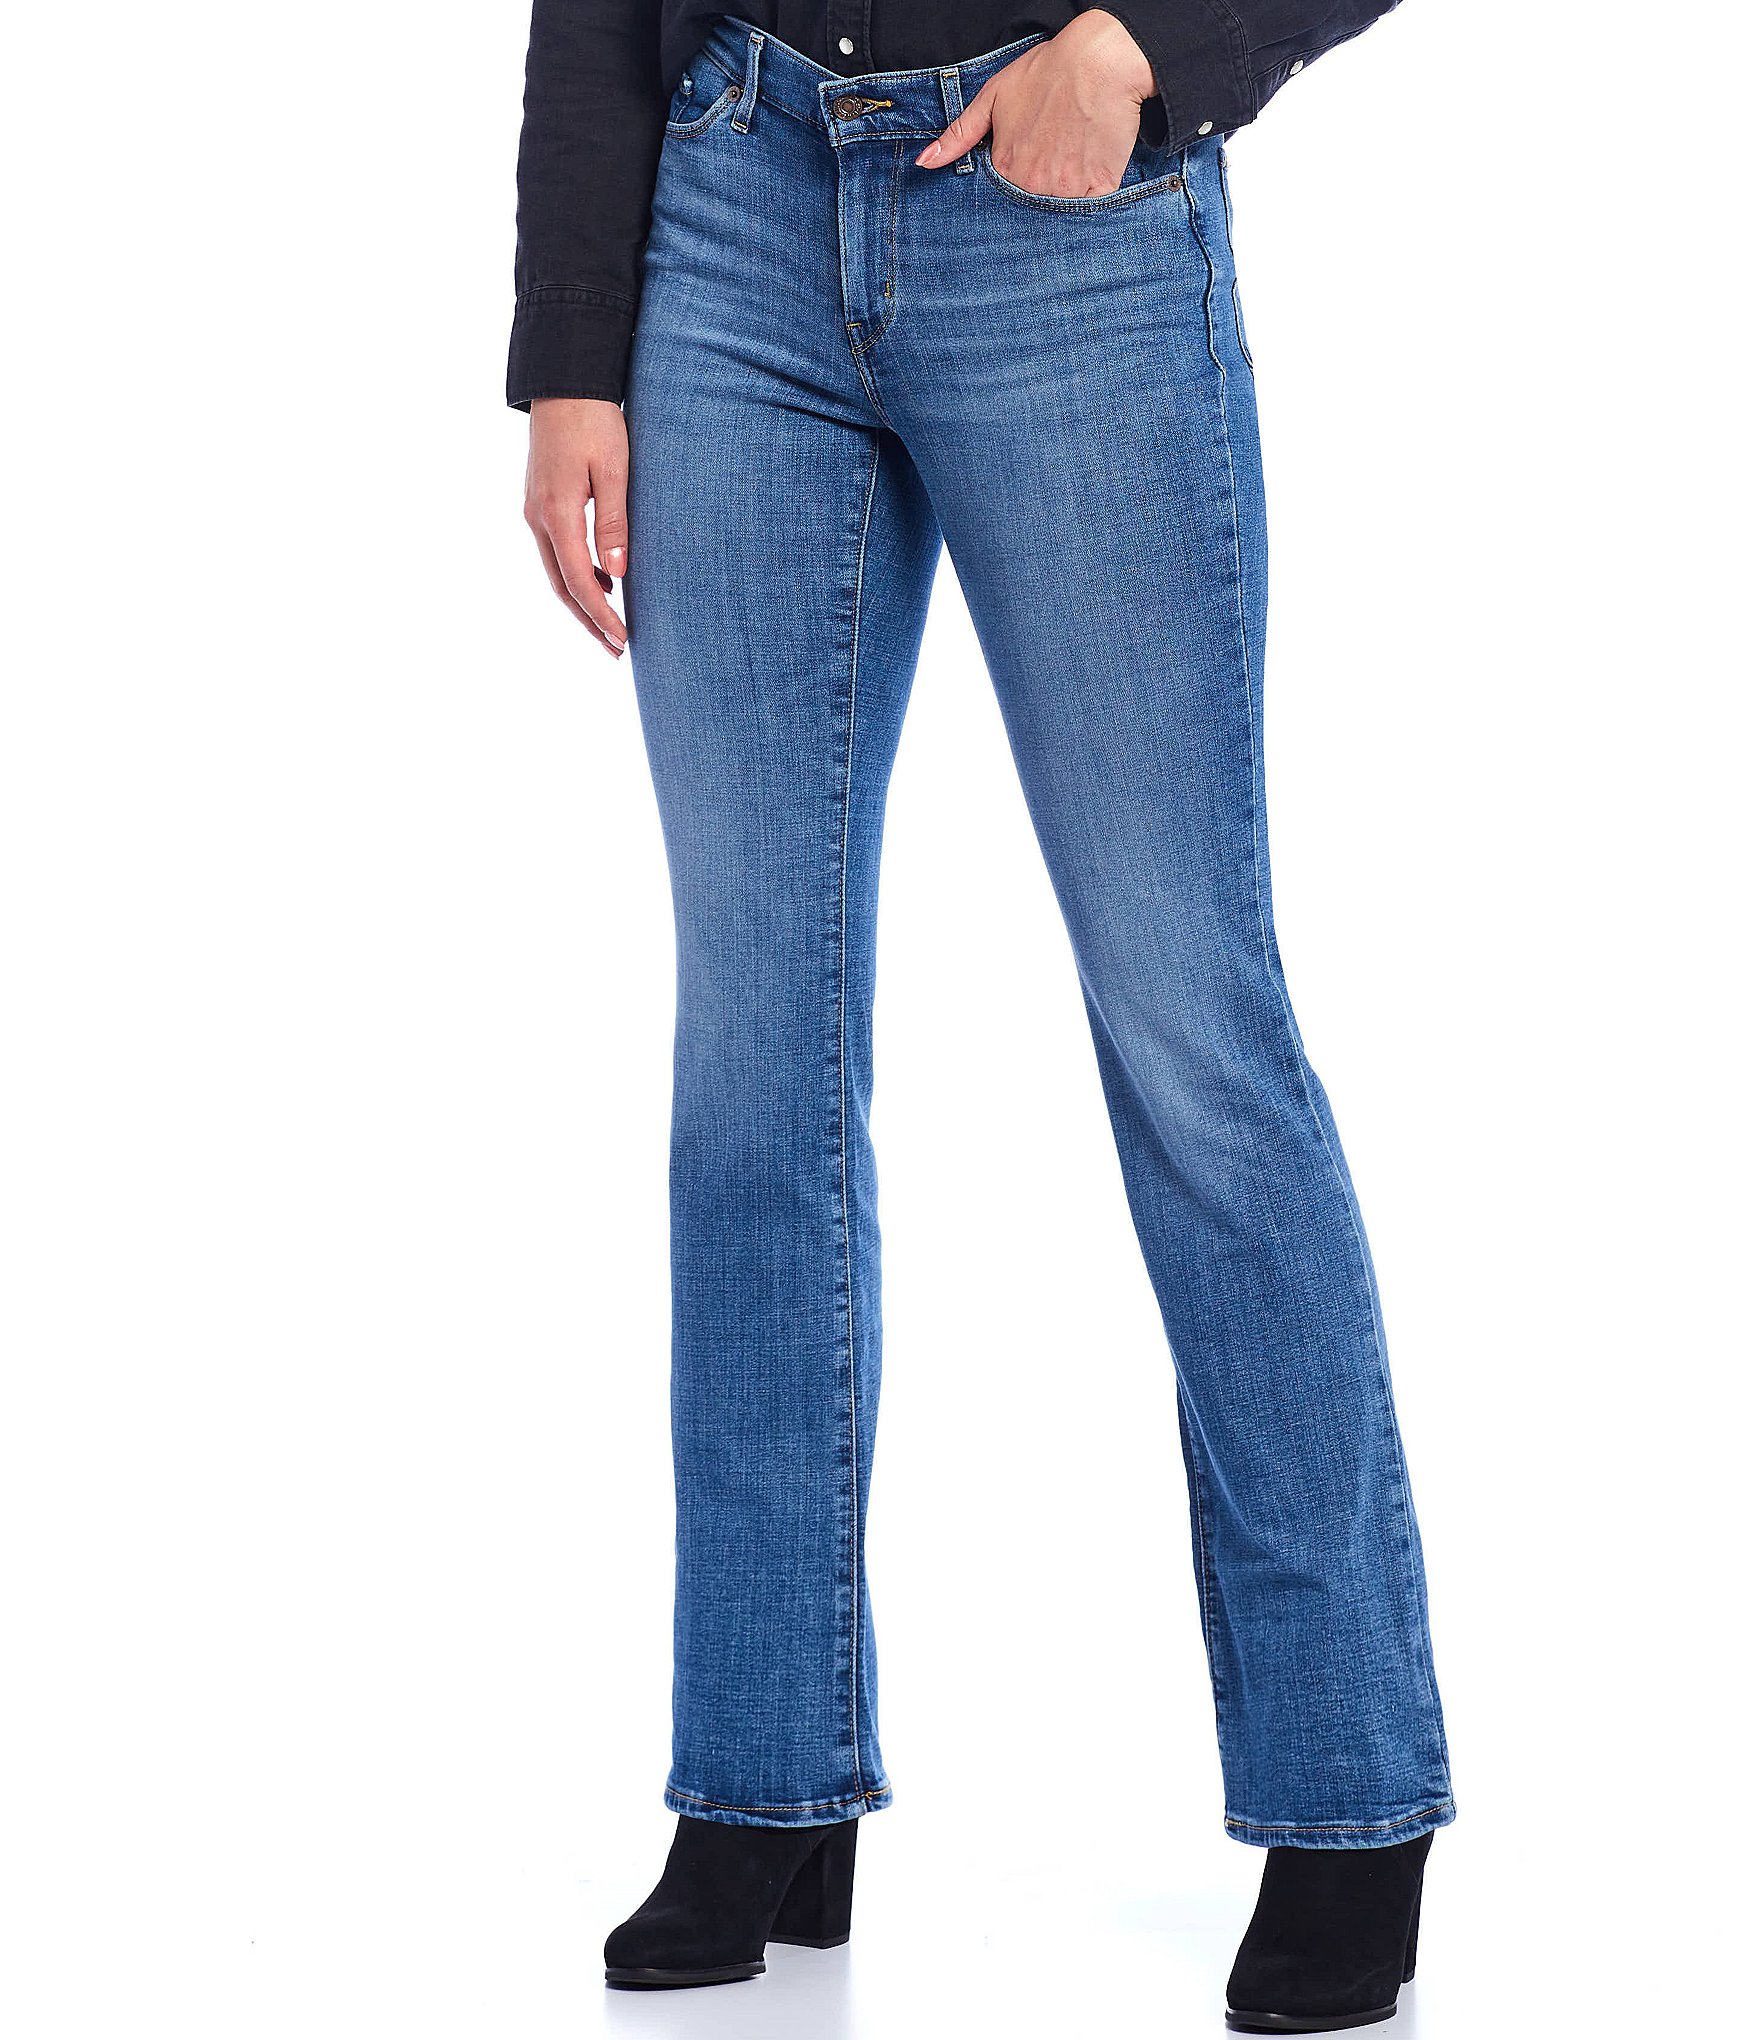 Buy > womens levis low rise bootcut jeans > in stock